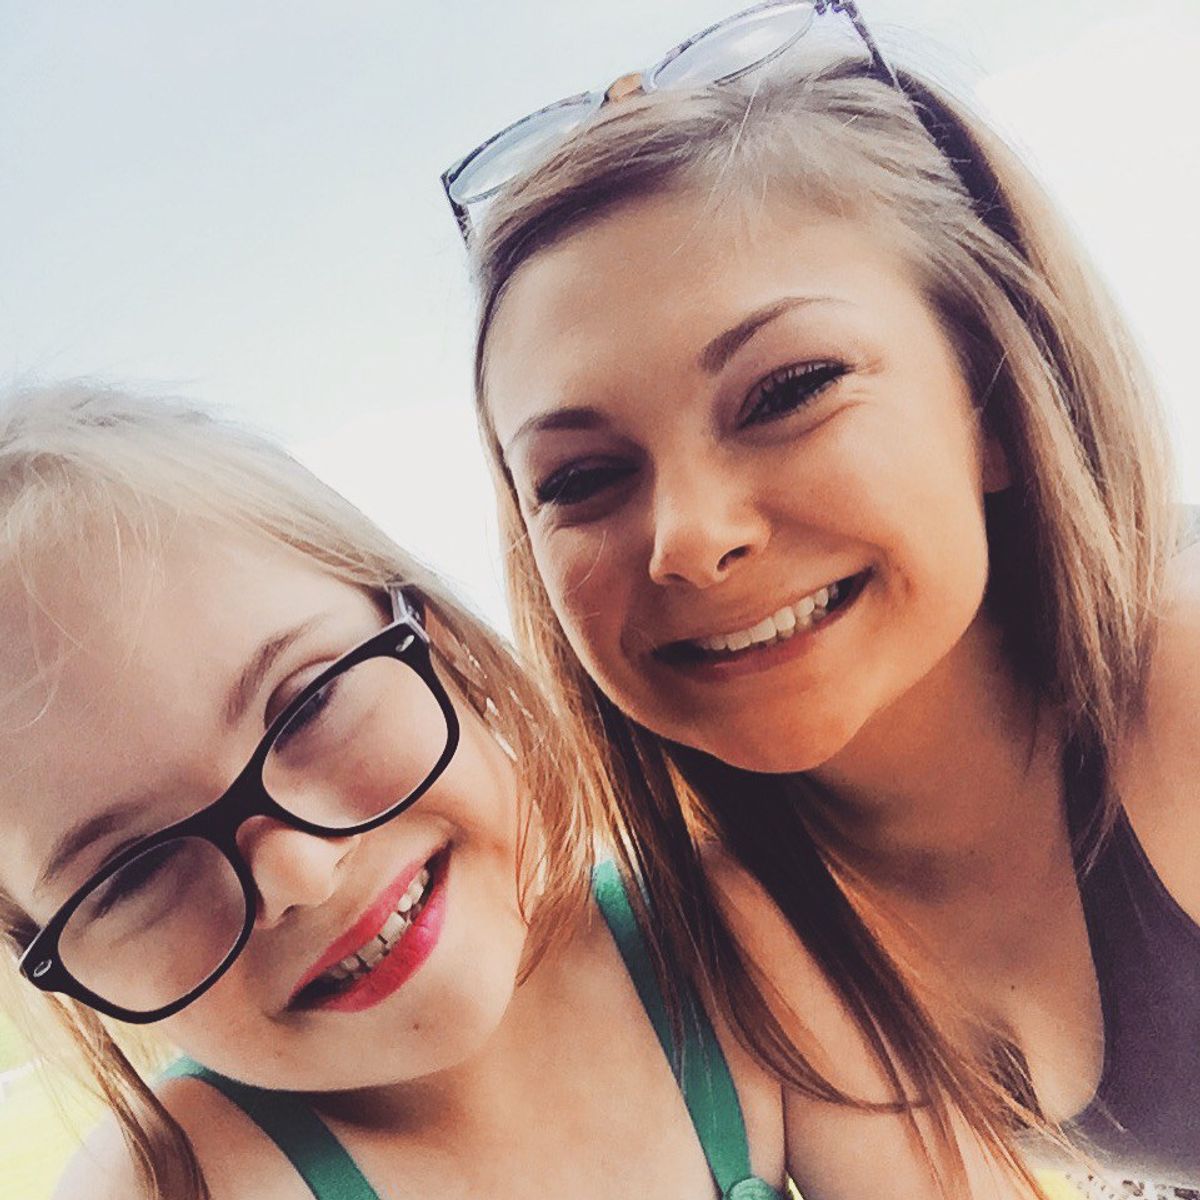 Why Having A Sister With Special Needs Is A Blessing